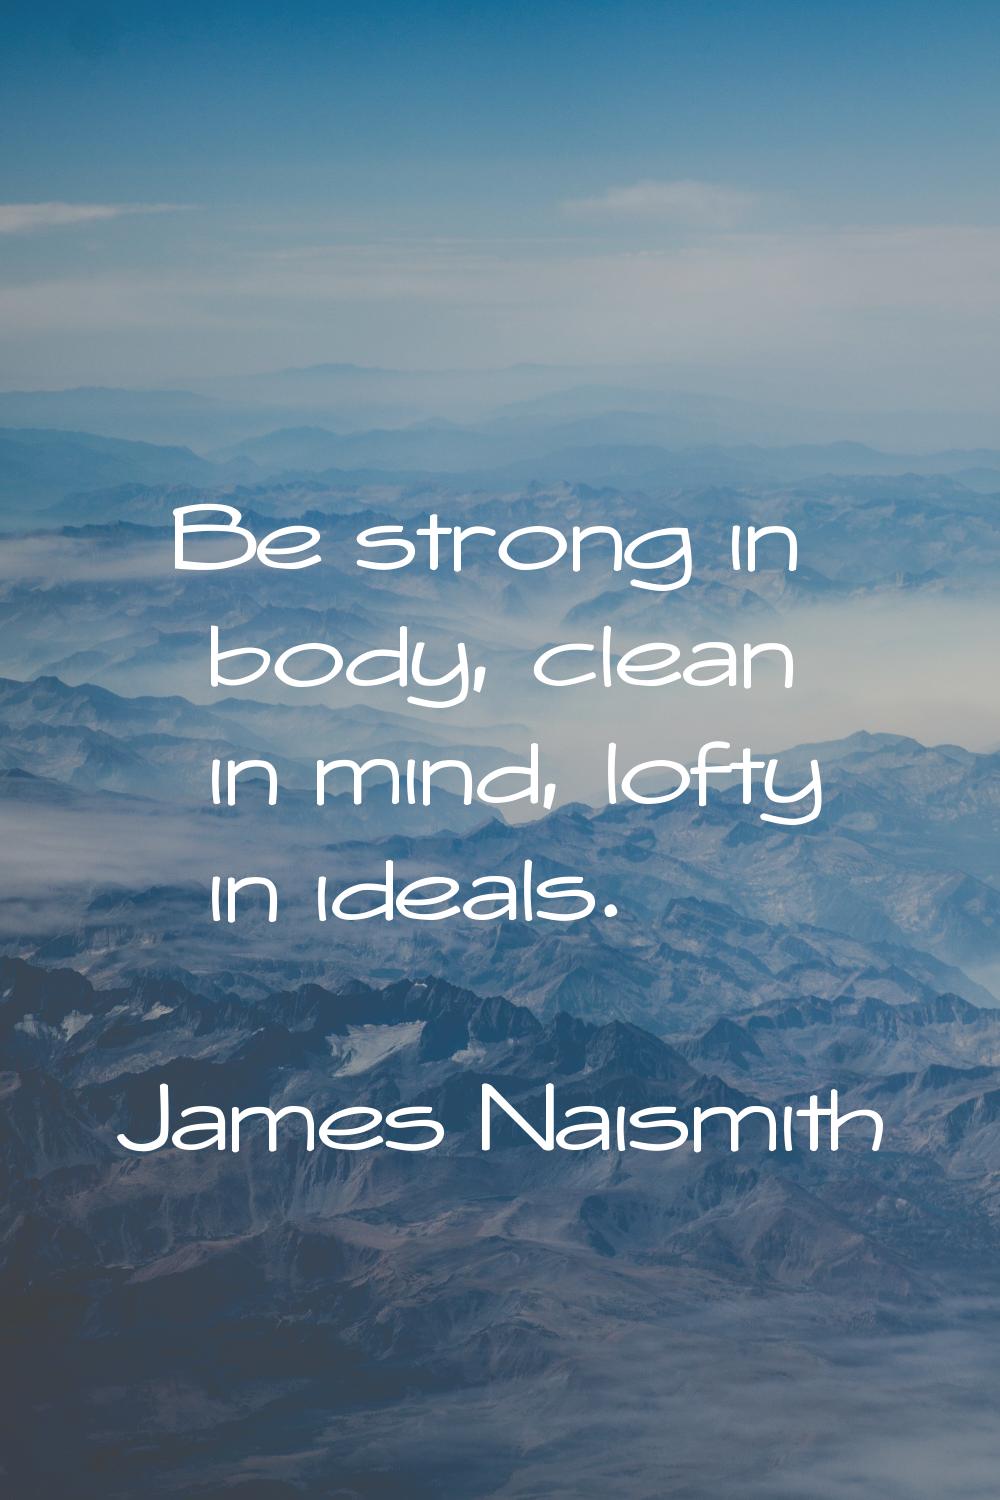 Be strong in body, clean in mind, lofty in ideals.